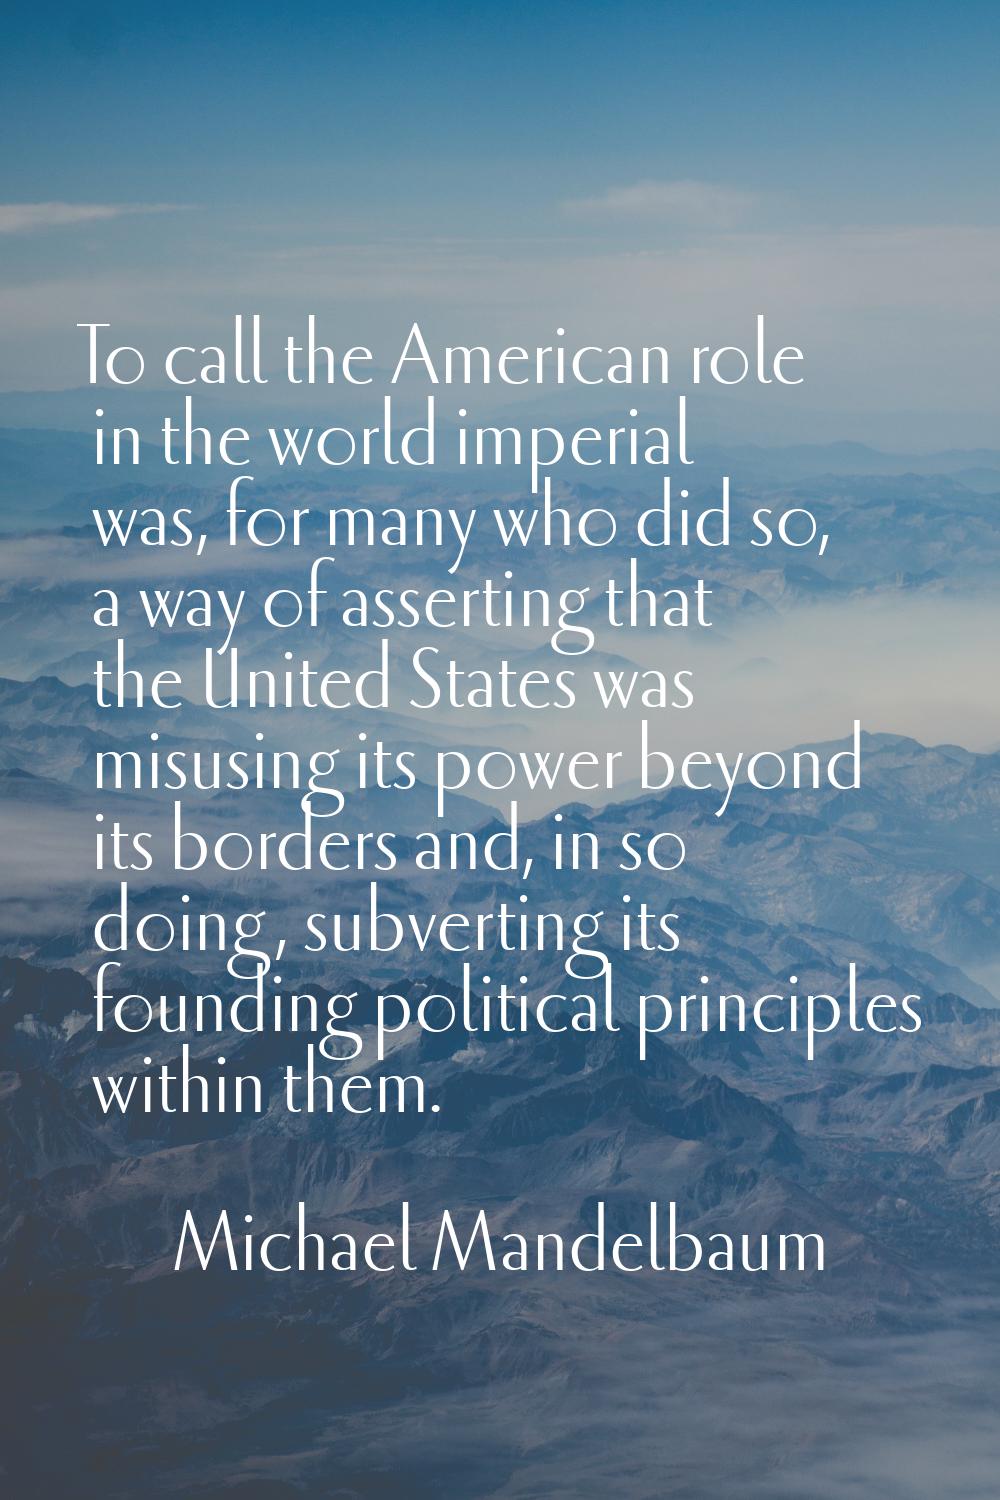 To call the American role in the world imperial was, for many who did so, a way of asserting that t